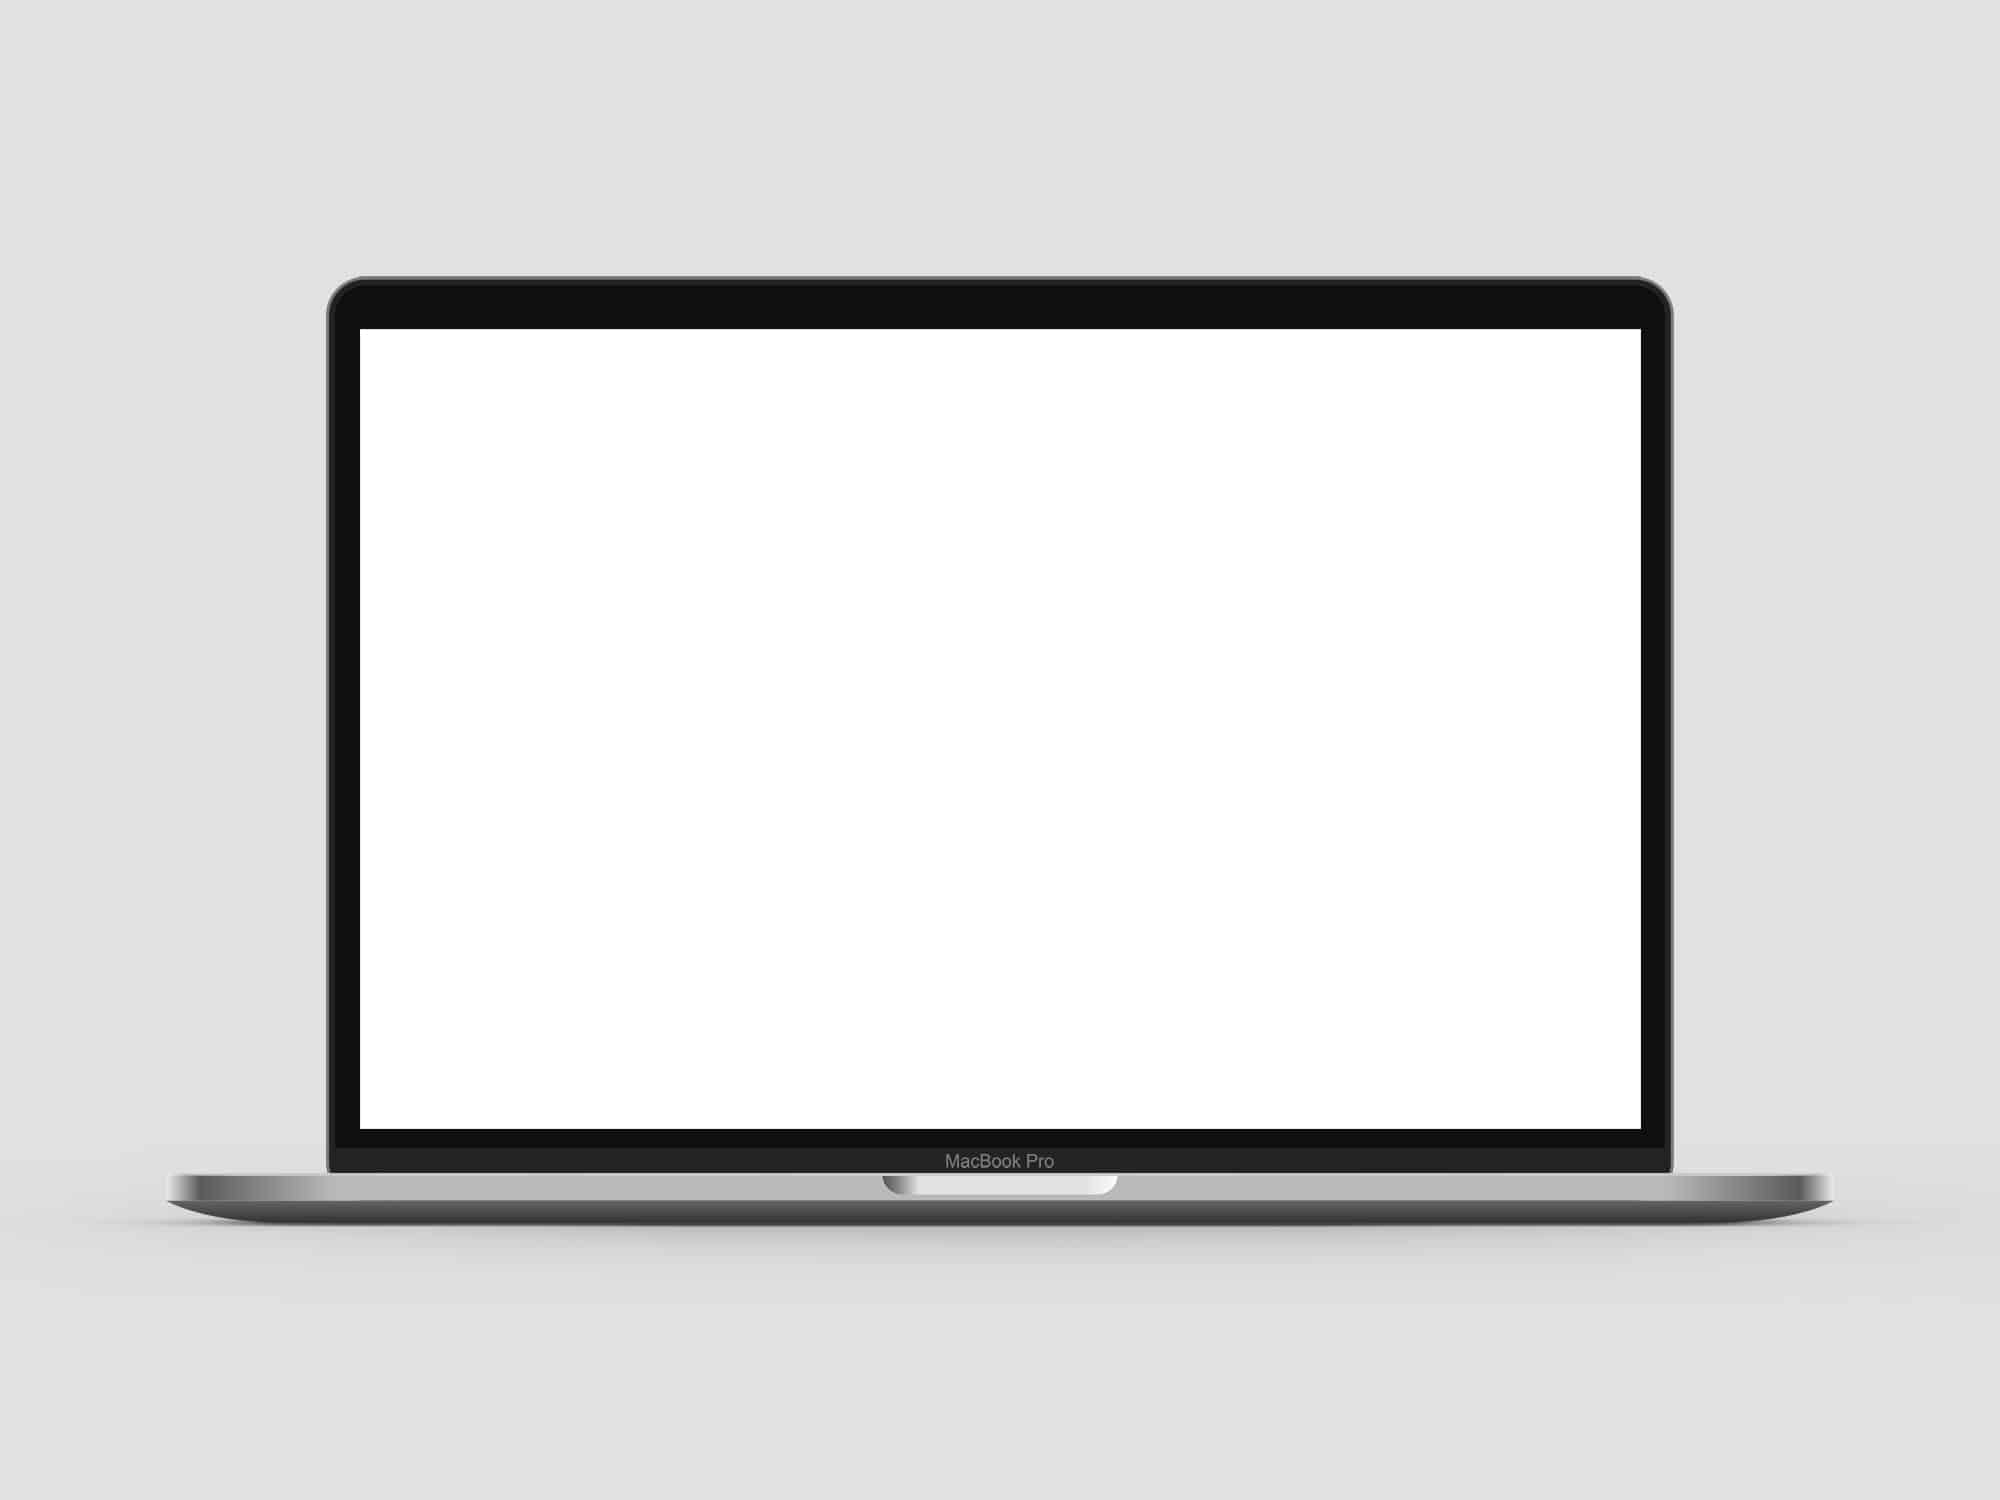 Download MacBook Pro Frontal View Mockup | The Mockup Club